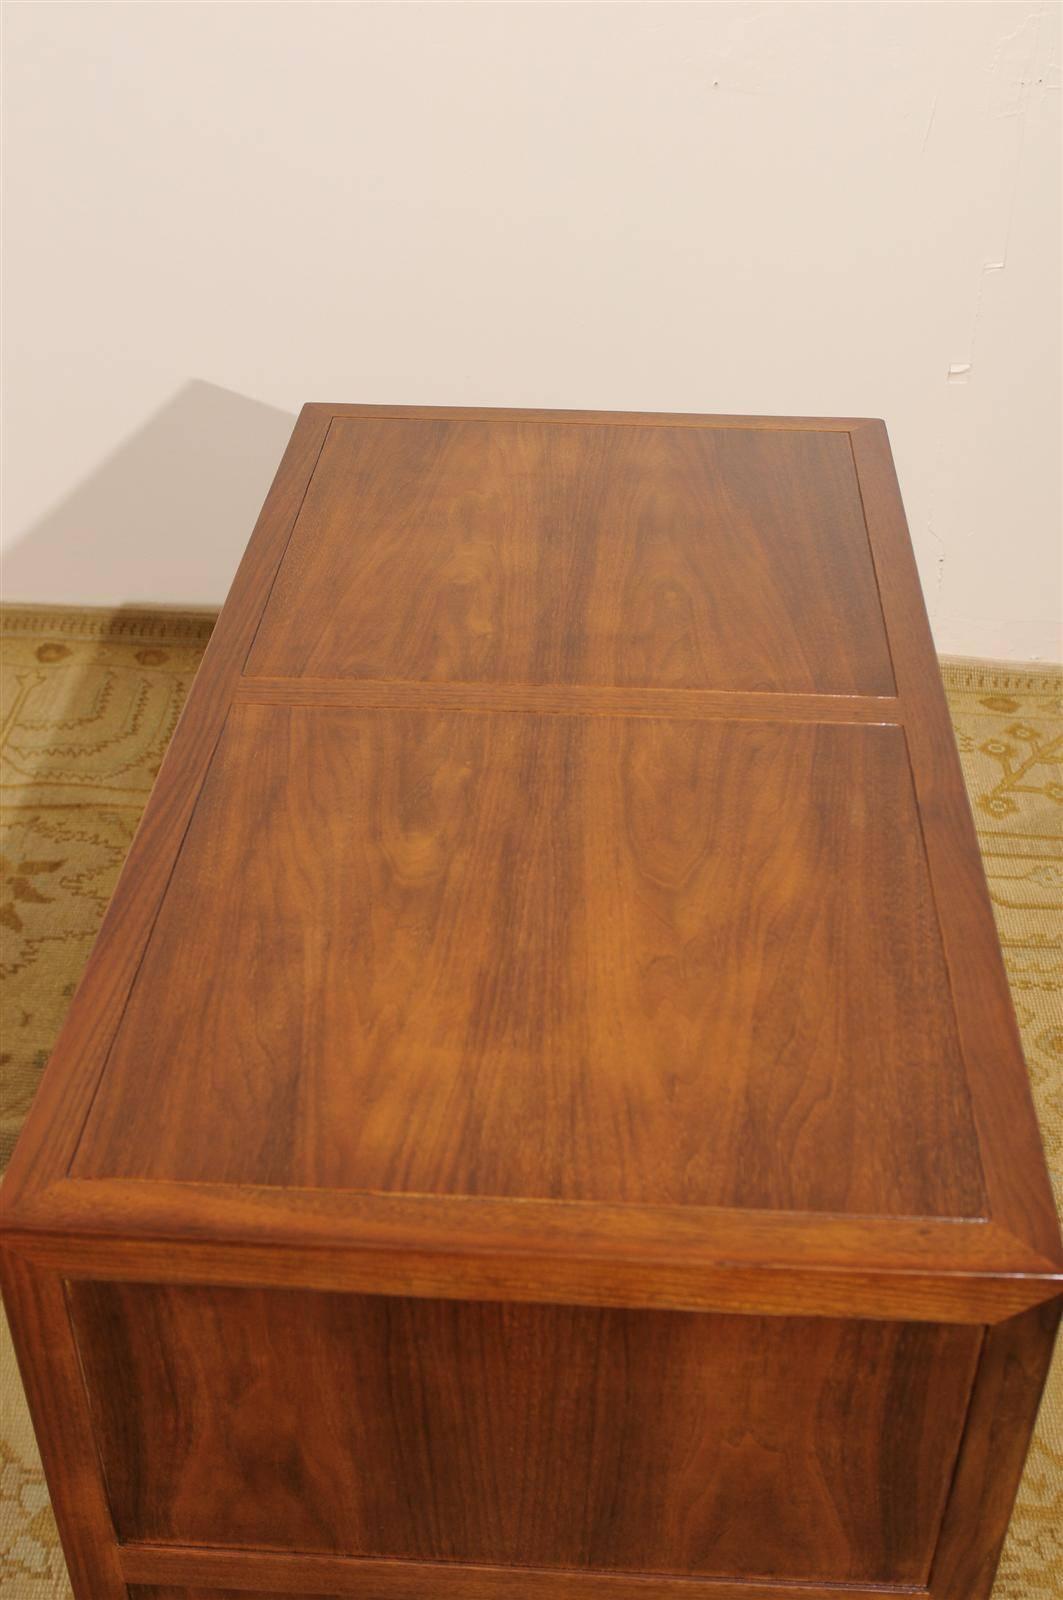 Stunning Restored Pair of Walnut Chests by Michael Taylor for Baker, circa 1960 For Sale 2